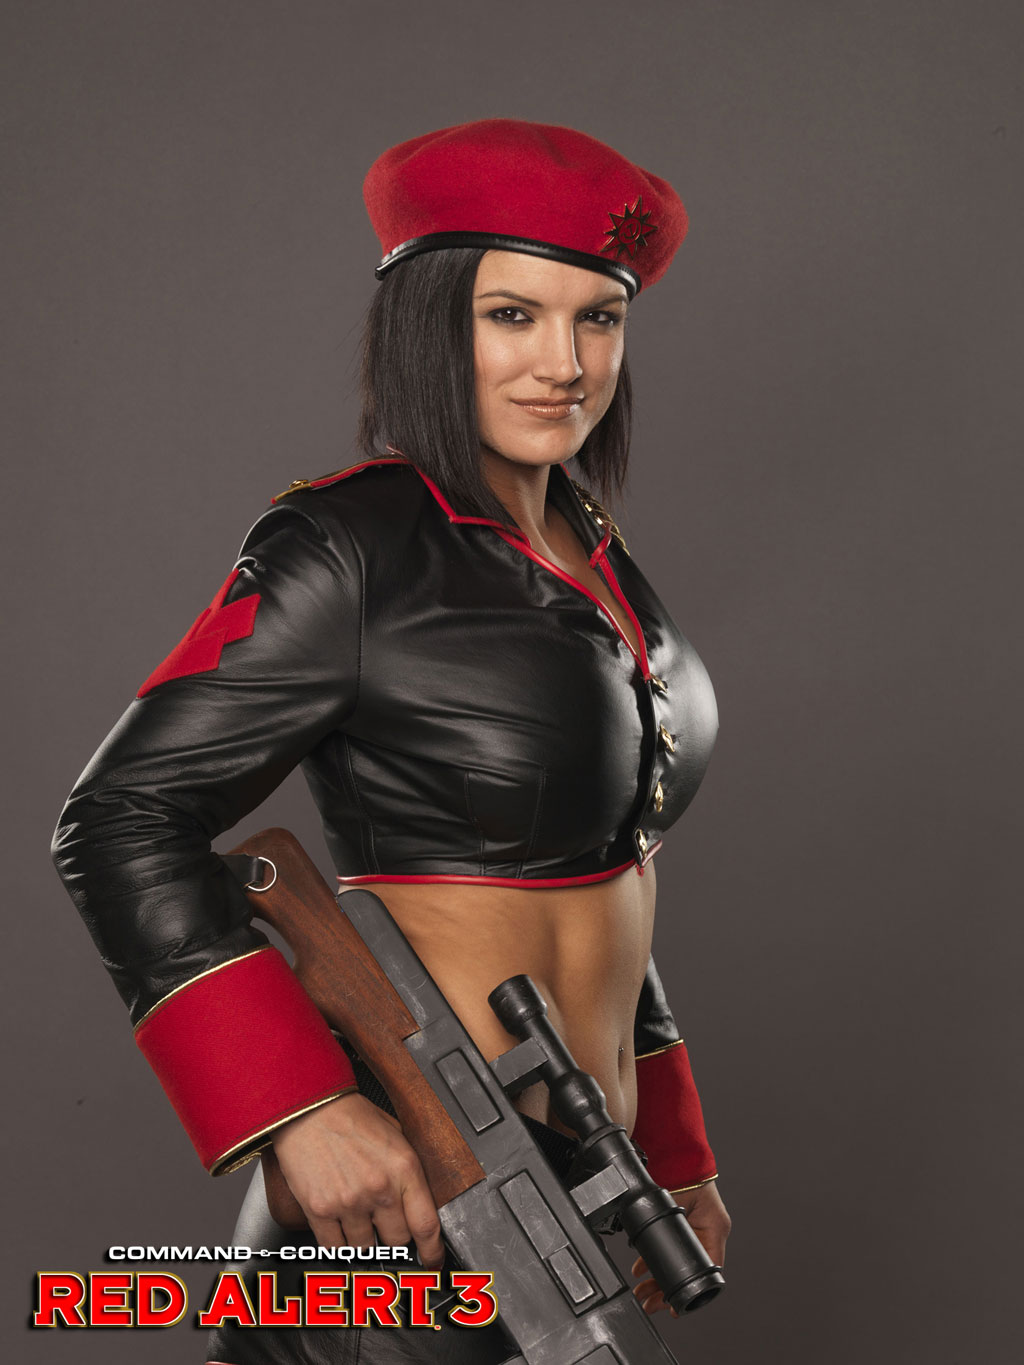 Best of Command and conquer girls